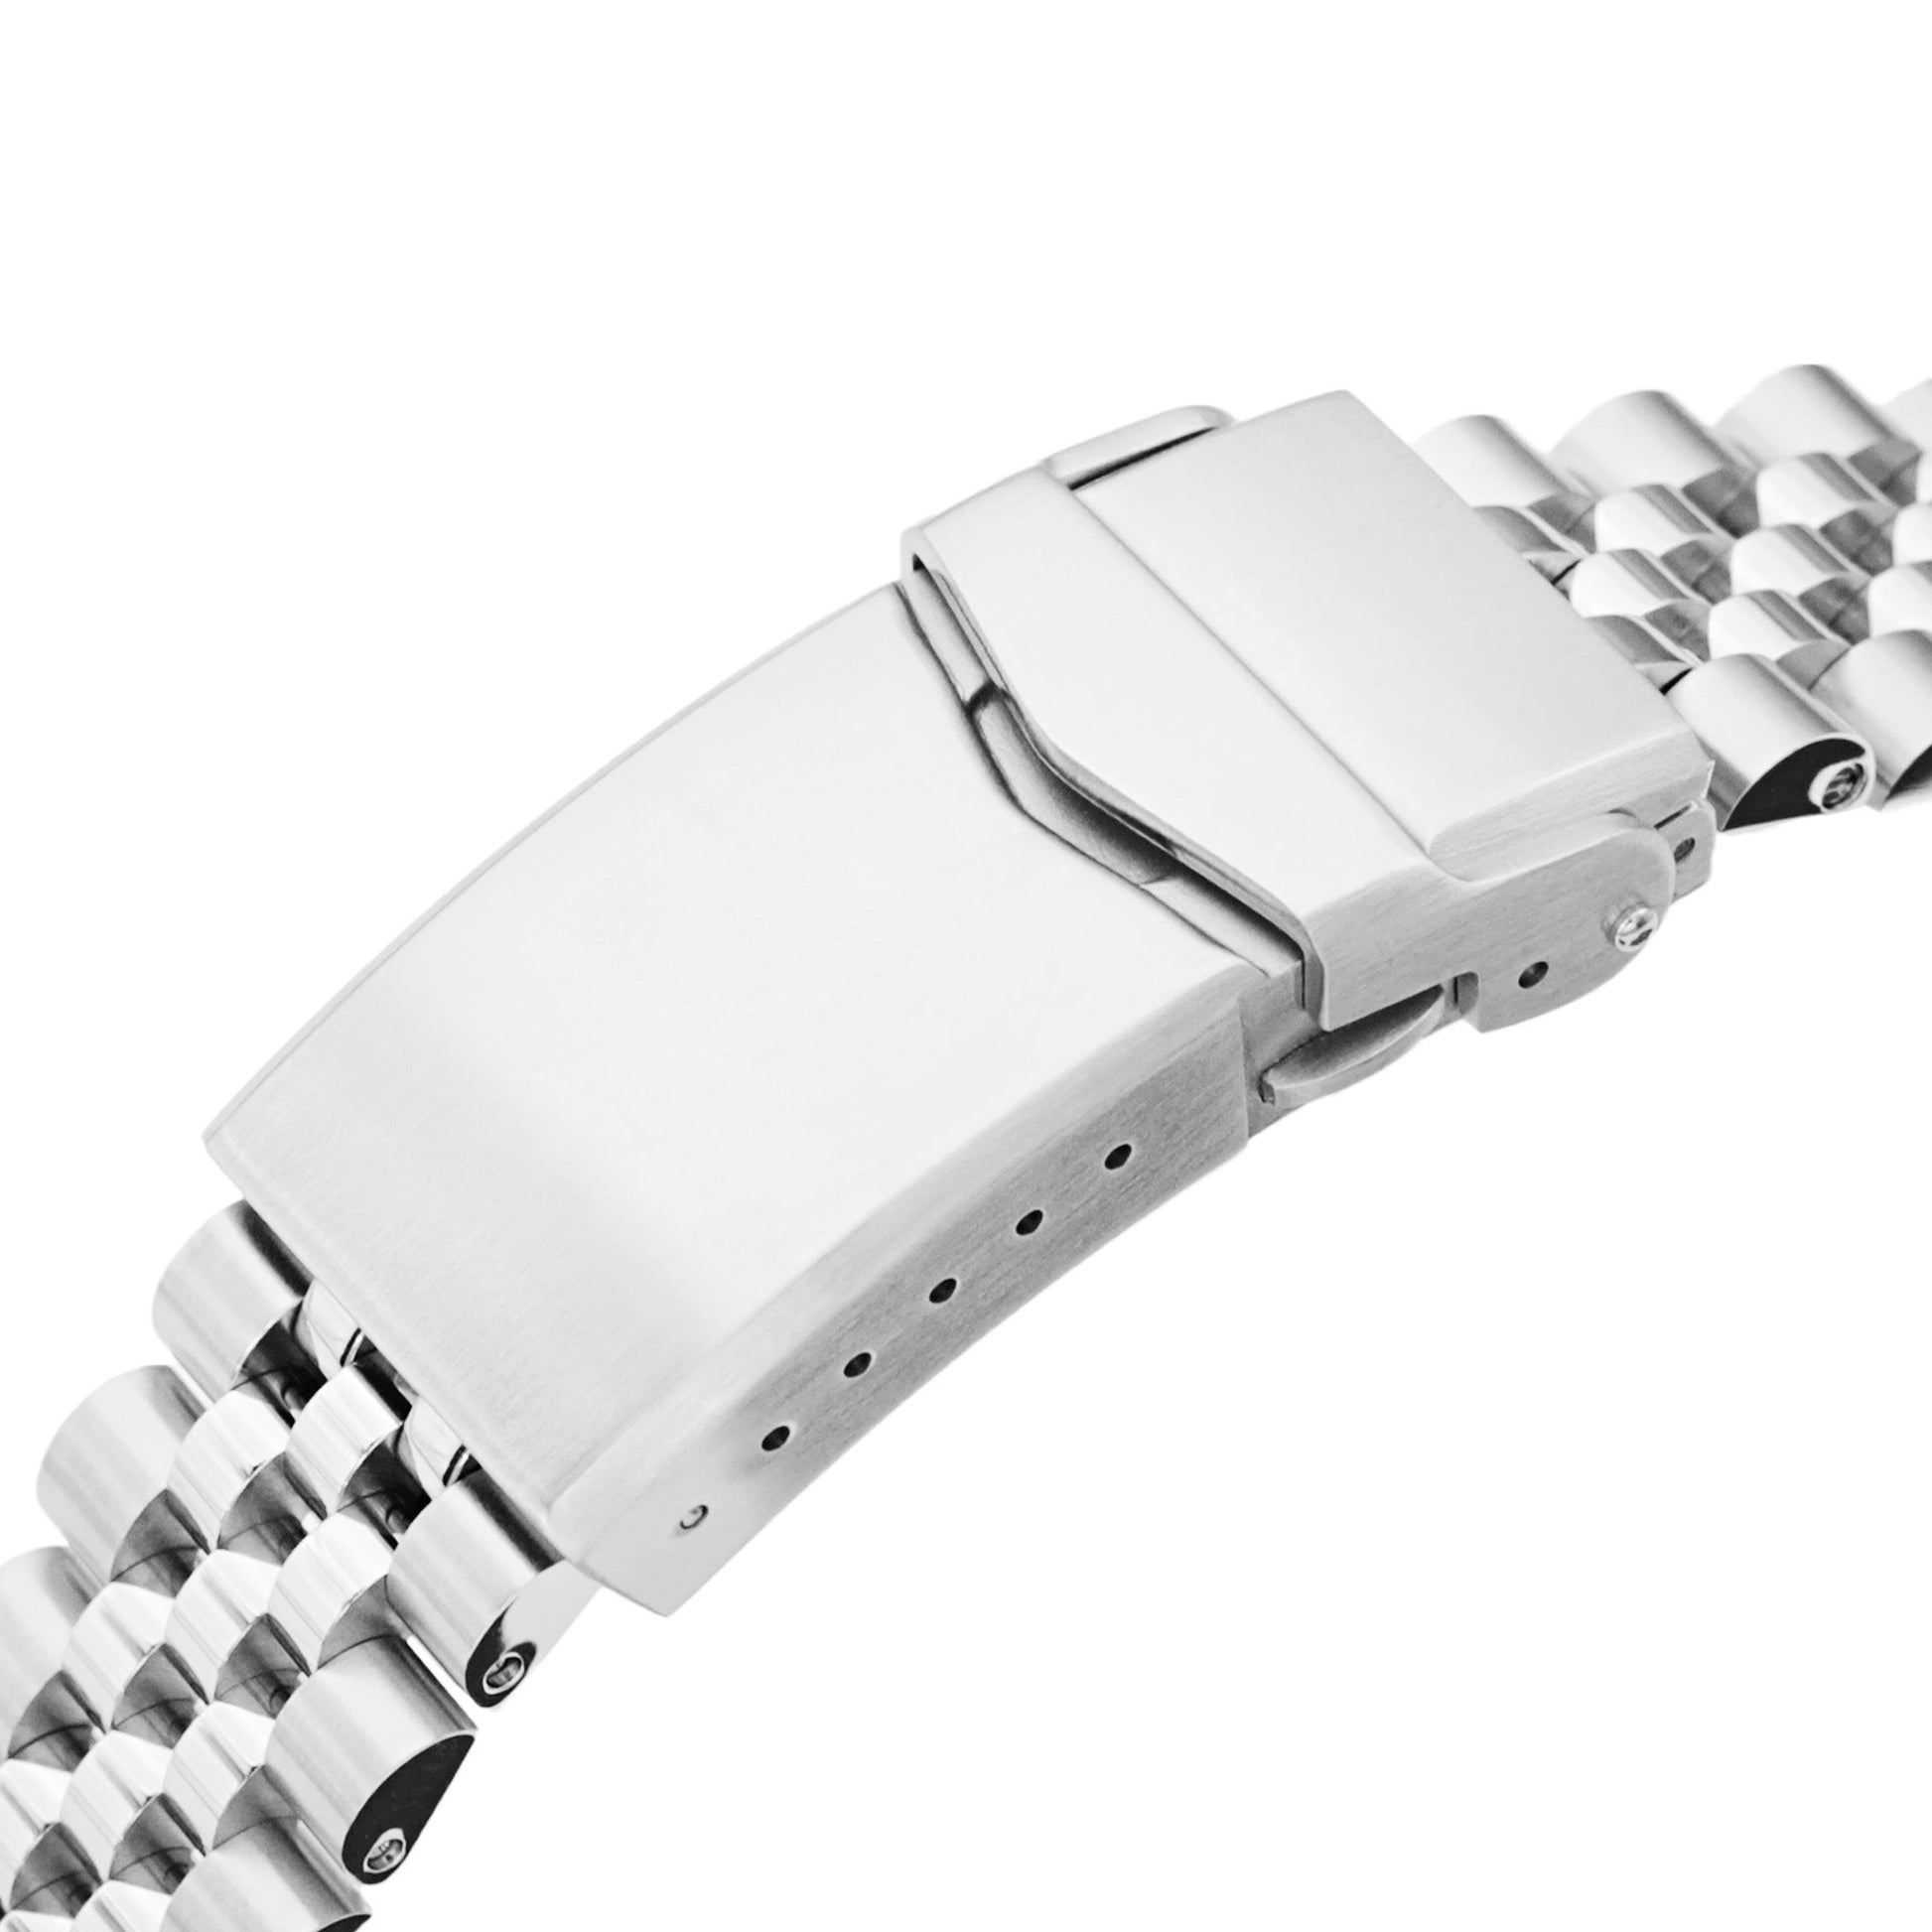 20mm Super-JUB II Watch Band for Seiko SSC813P1, 316L Stainless Steel Brushed V-Clasp